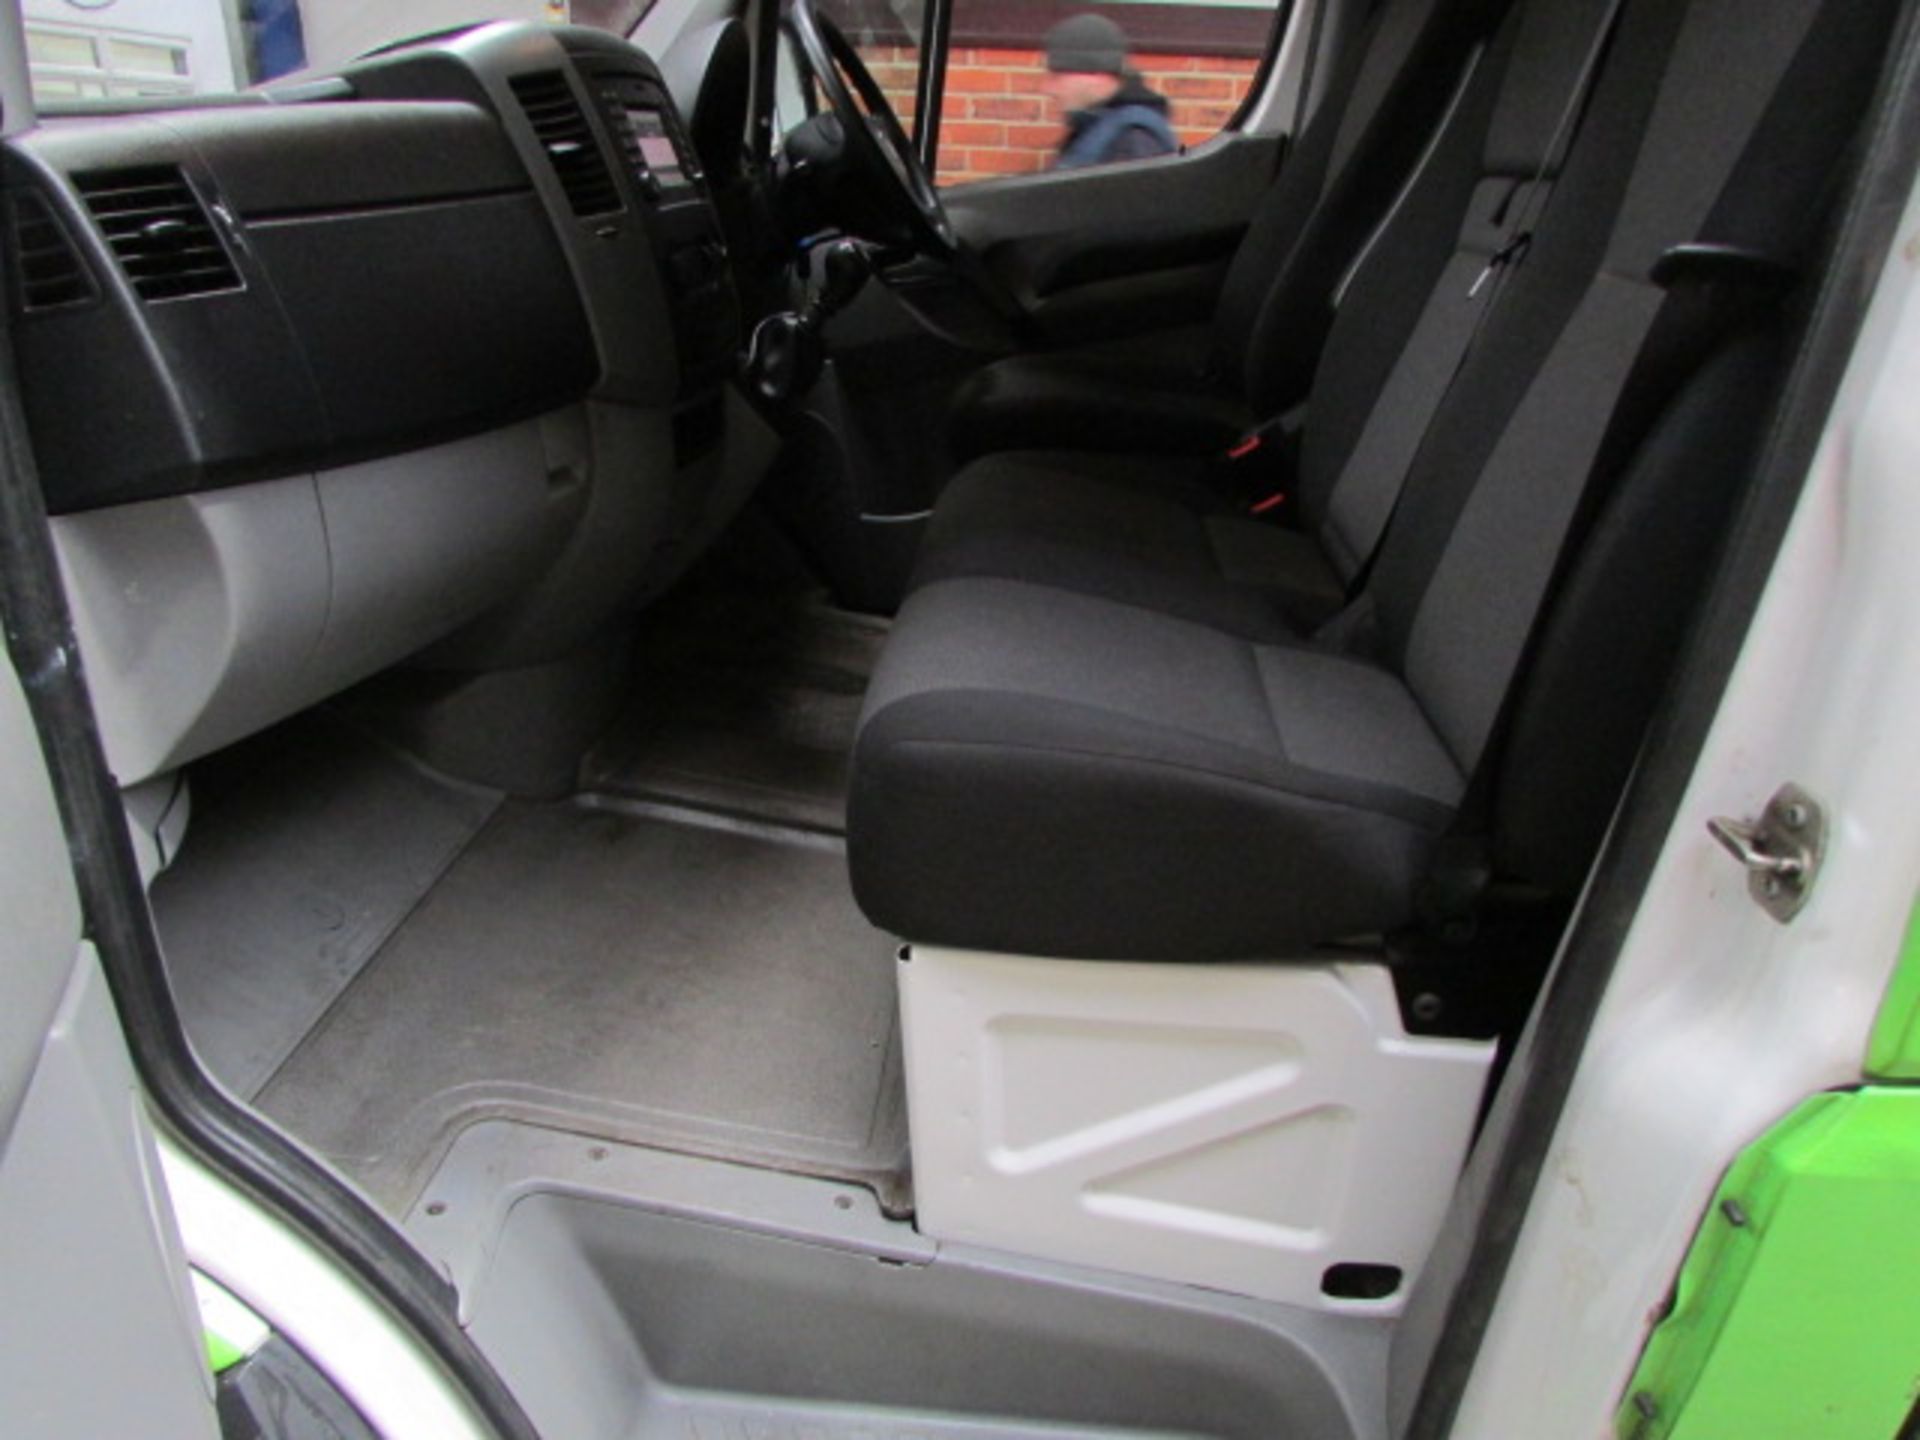 65 15 VW Crafter CR35 TDI - Image 18 of 25